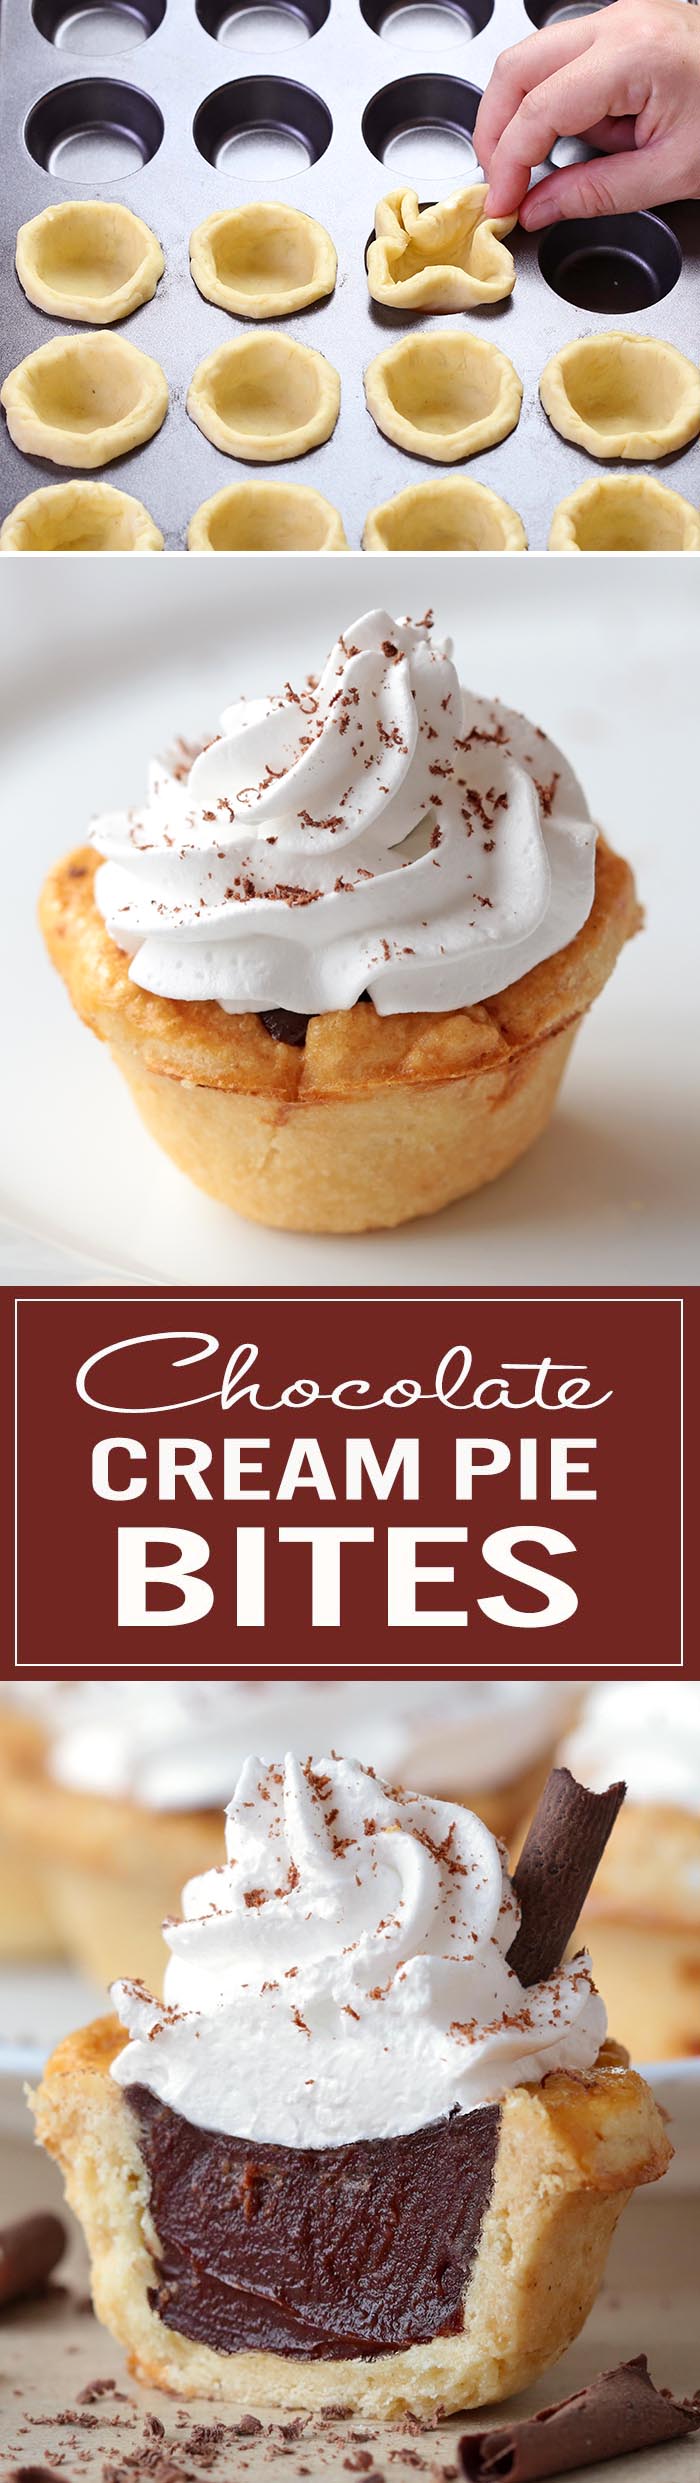 These Chocolate Cream Pie Bites are great for a crowd, and perhaps even better as a bite-sized treat to share with a loved one on a special occasion – with leftovers, of course!